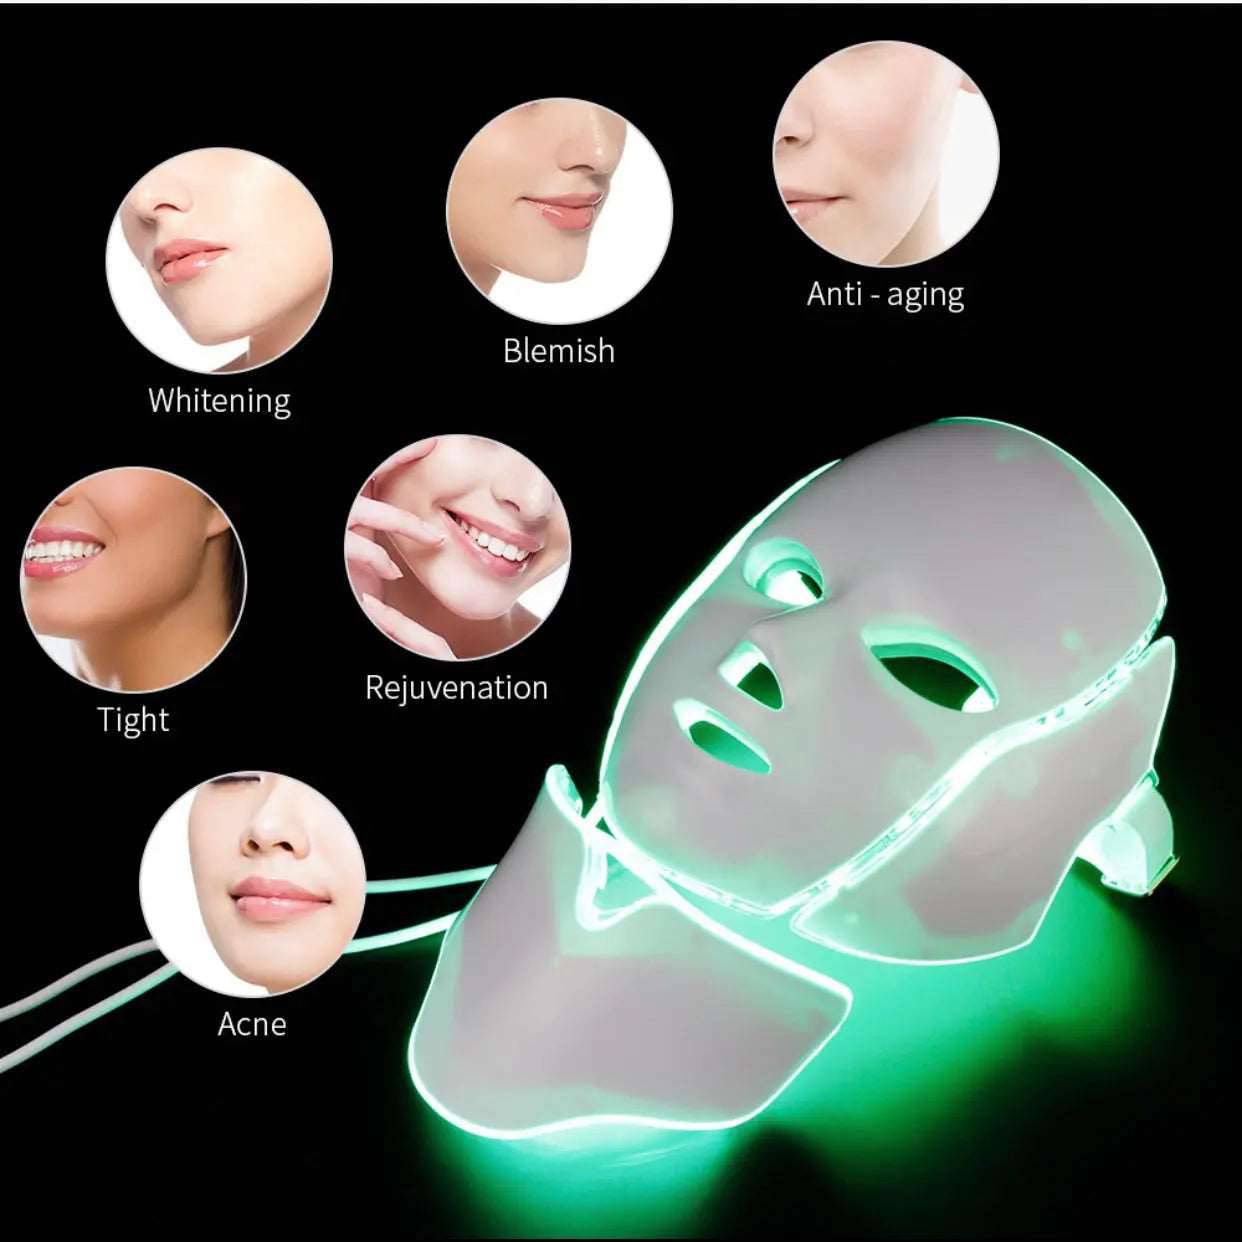 Air Bag-7 Colors Light LED Facial Mask With Neck Skin Rejuvenation Face Care Treatment Beauty Anti Acne Therapy Whitening - TheWellBeing4All